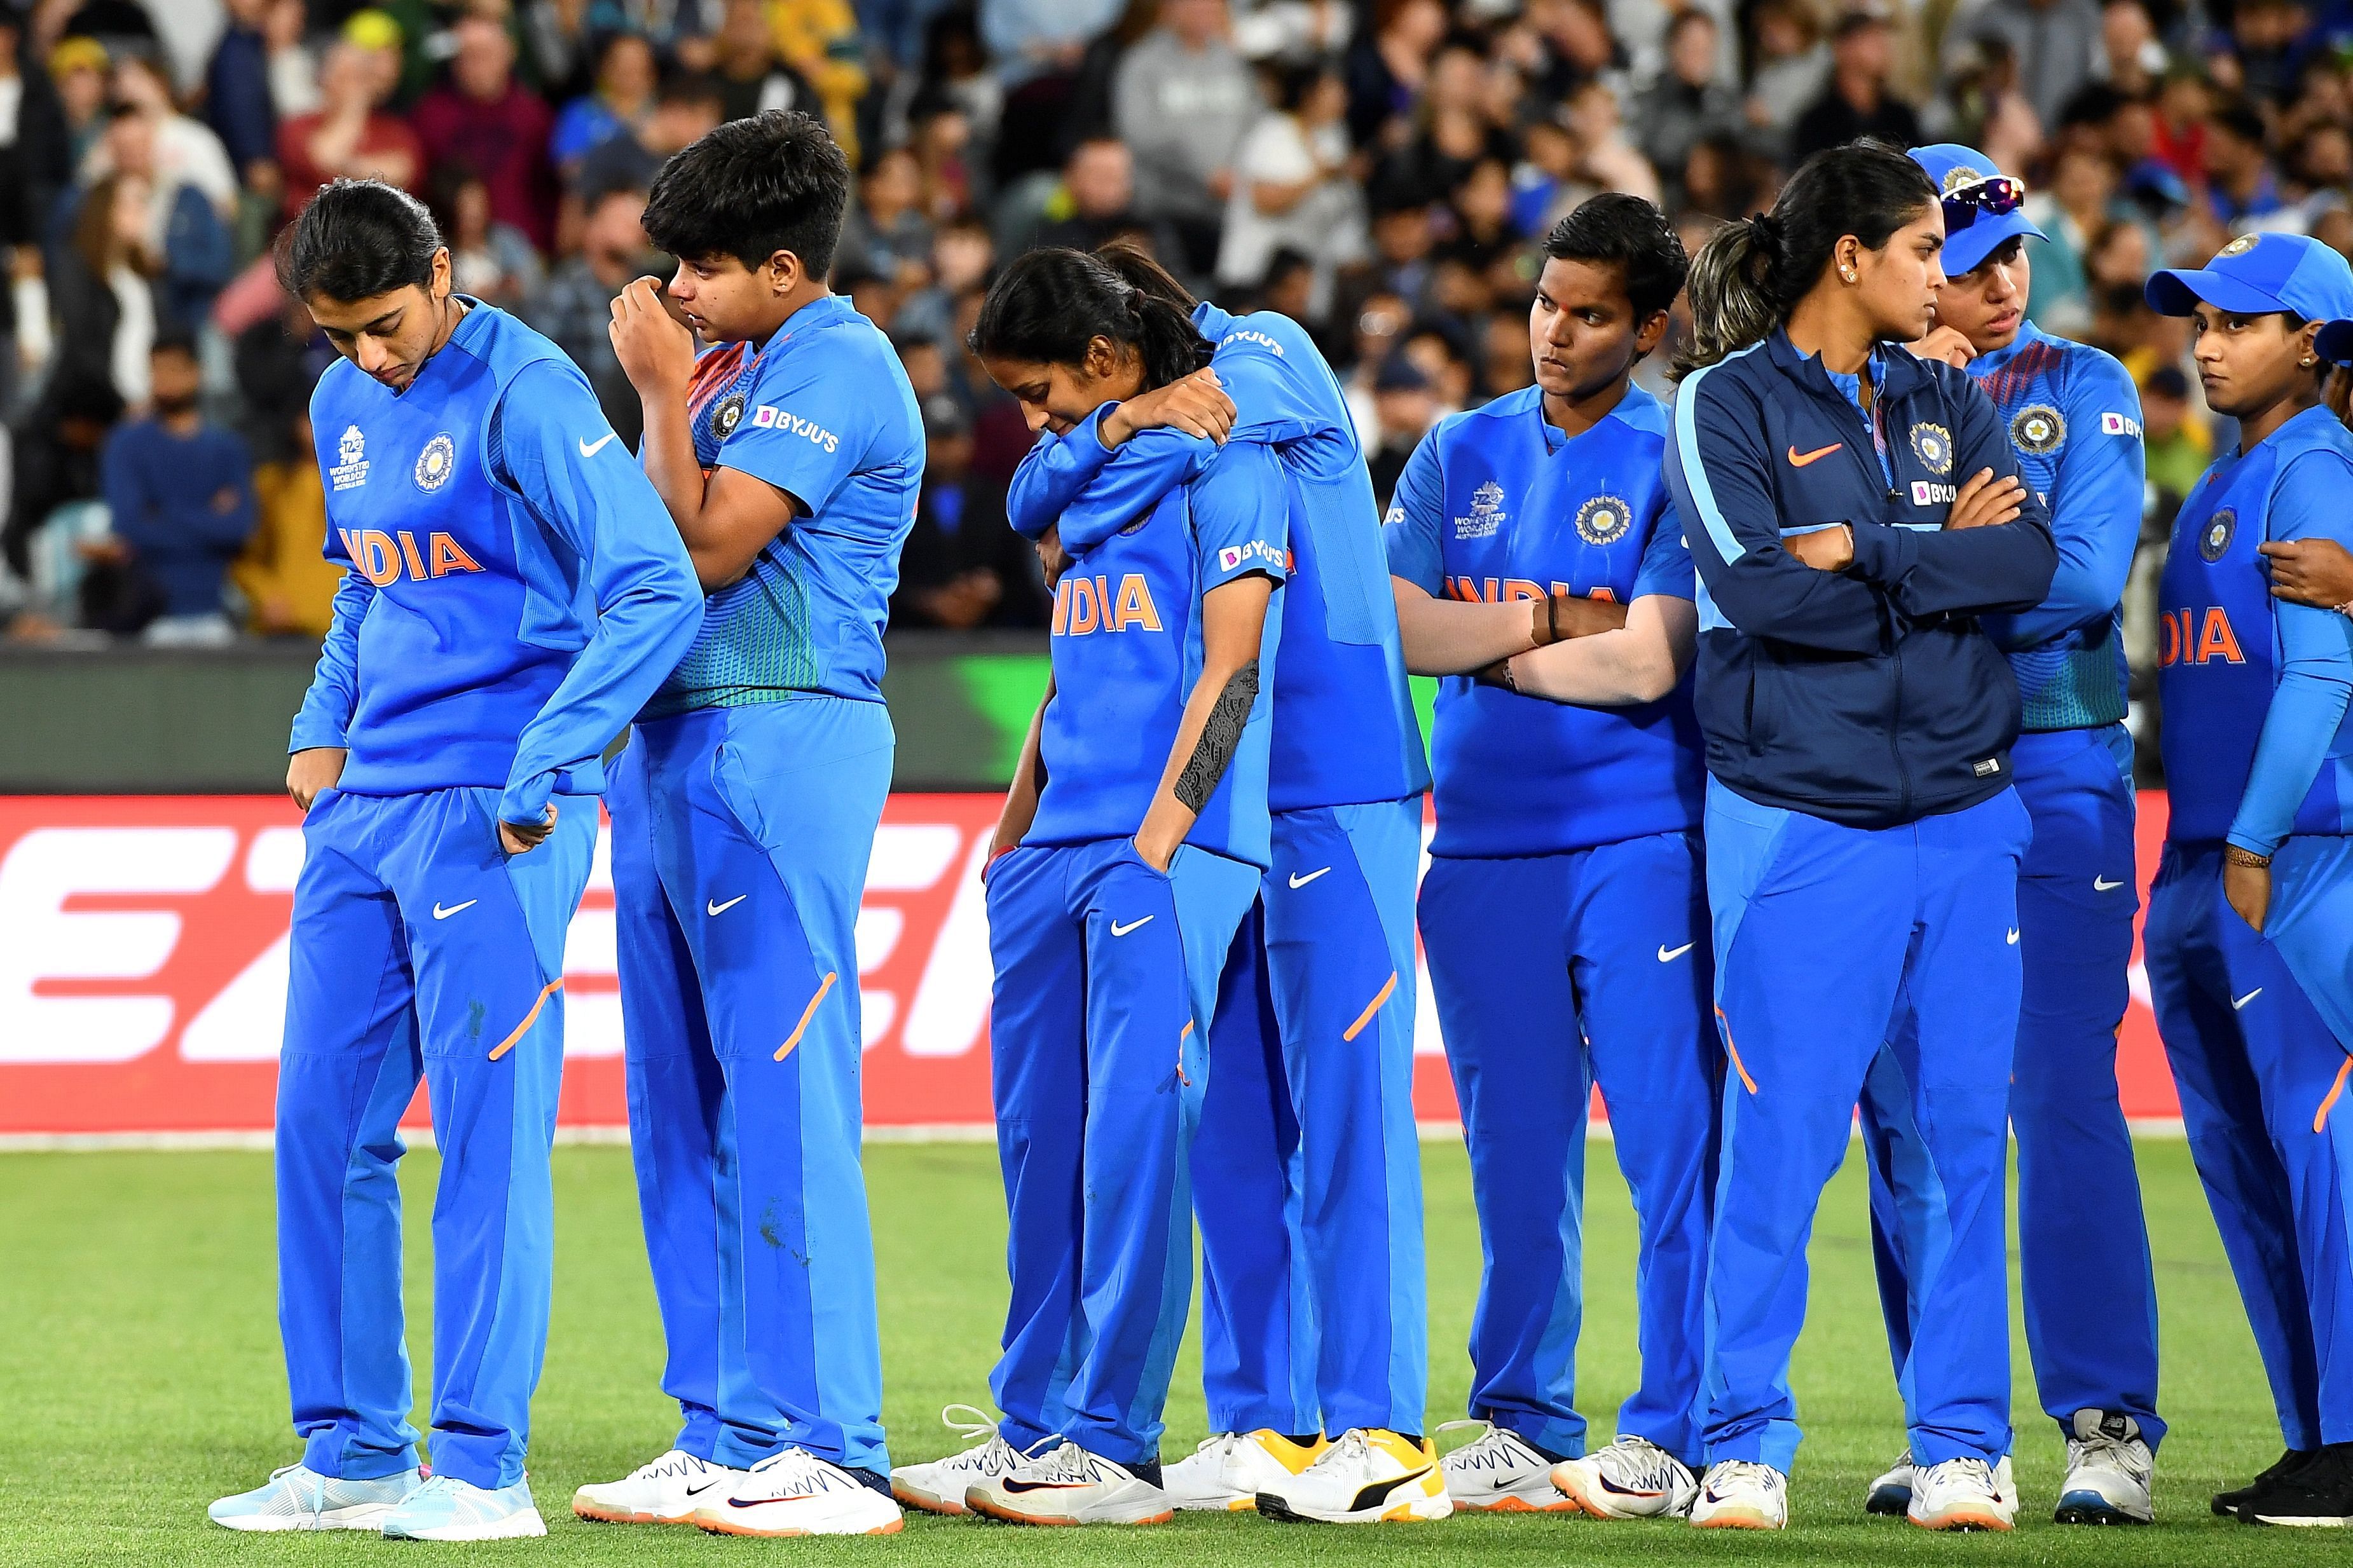 India's players reacts after losing the final against Australia of the Twenty20 women's World Cup cricket match between Australia and India in Melbourne on March 8, 2020. (Photo by AFP)